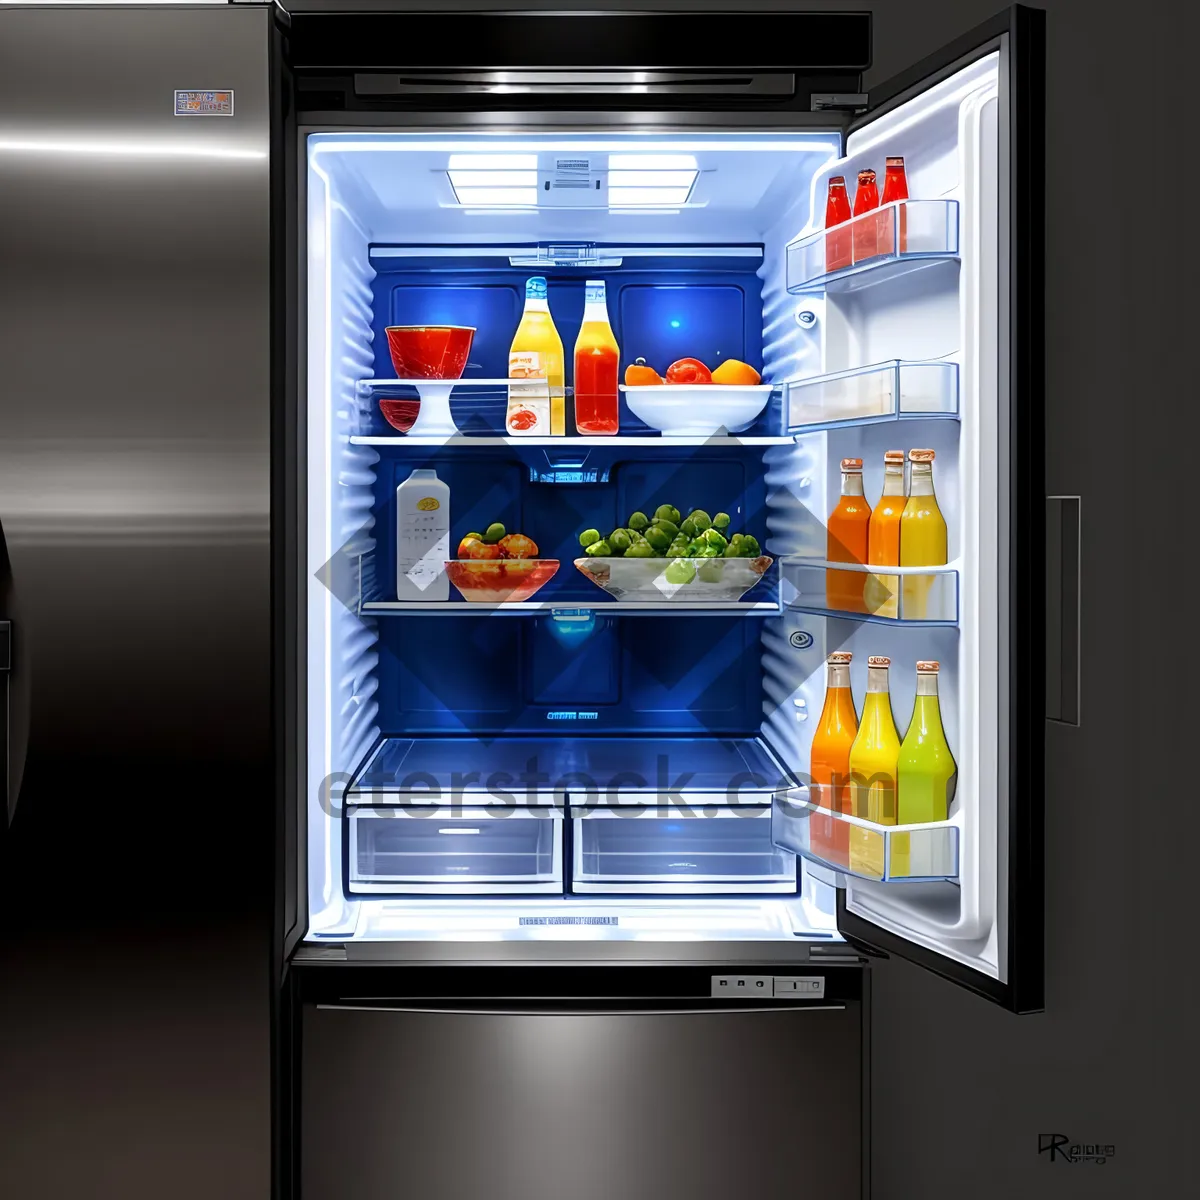 Picture of Cafeteria Vending Machine: Modernized Refrigeration and Snack Dispenser